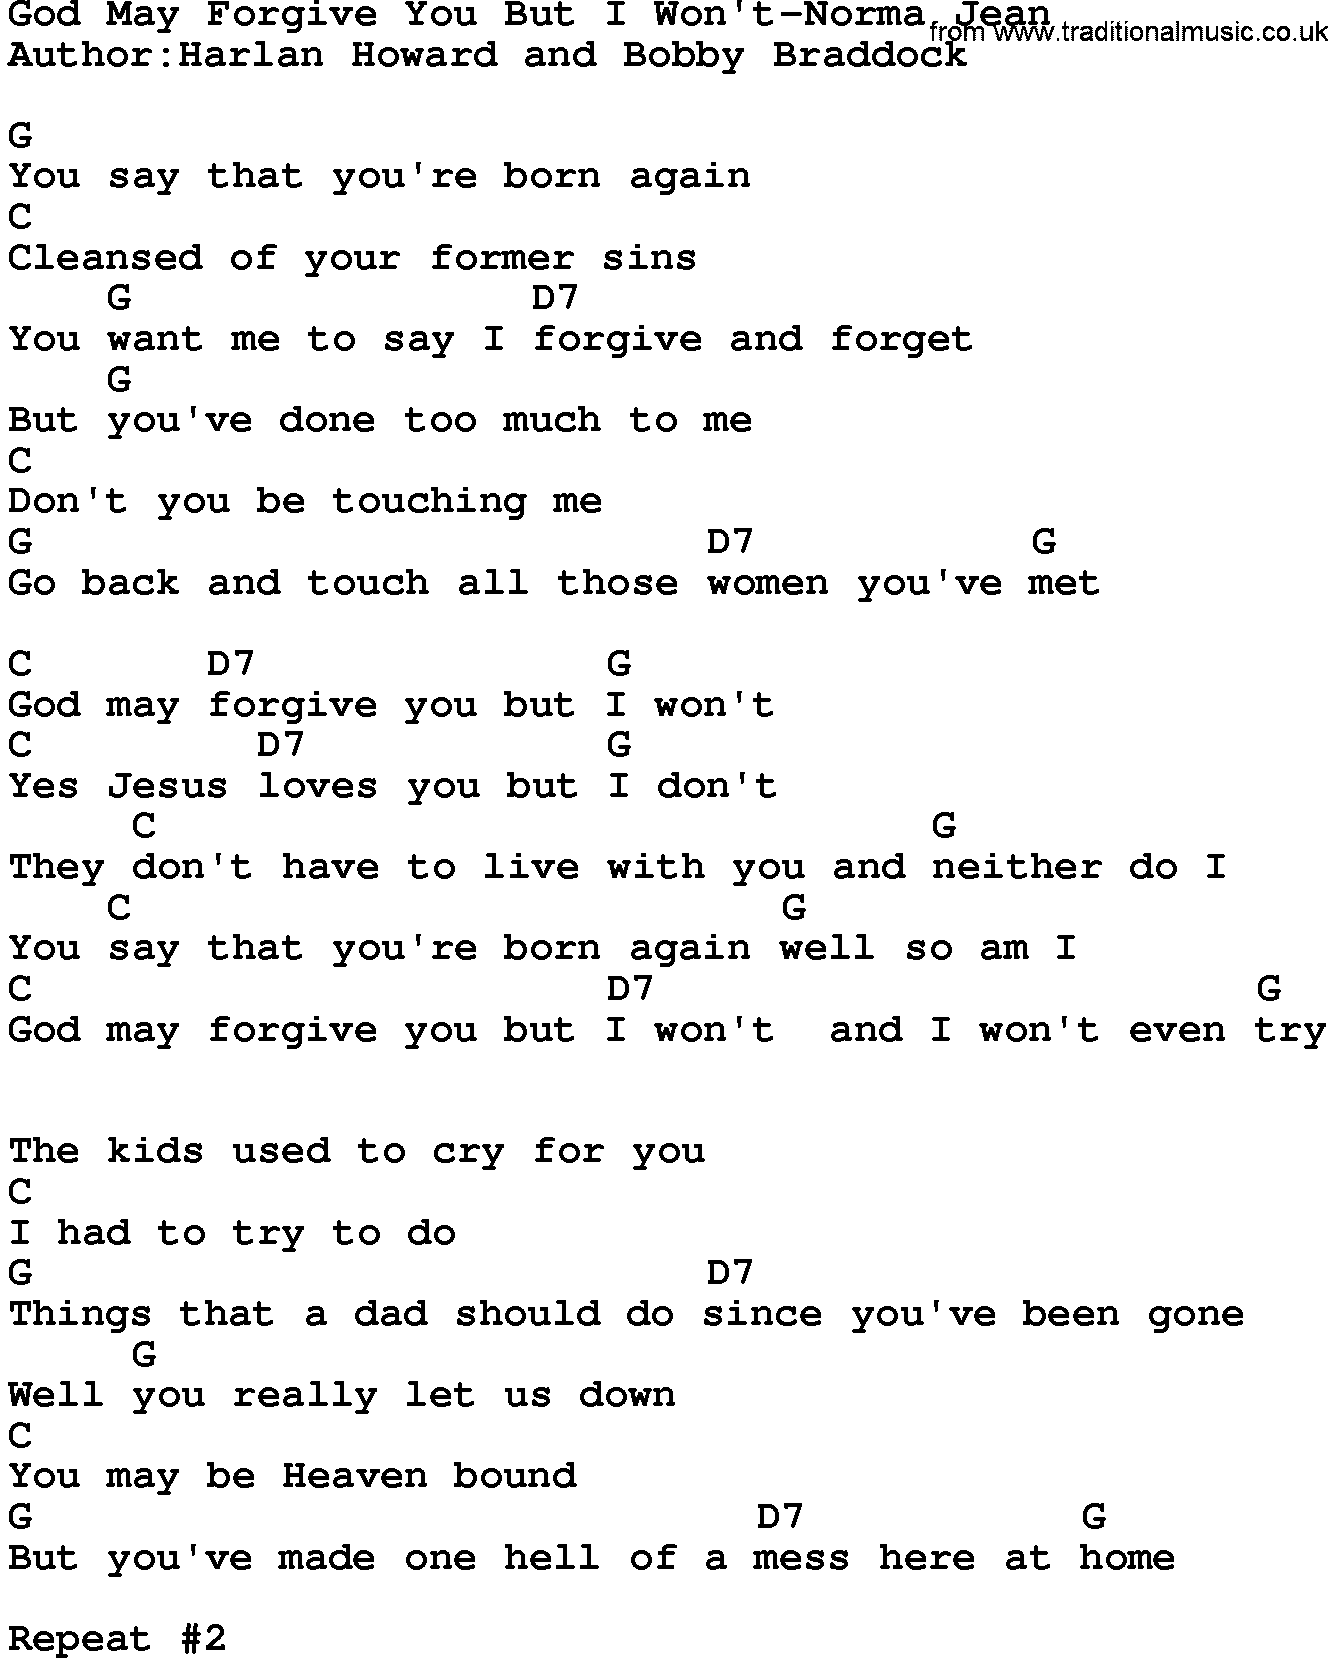 Country music song: God May Forgive You But I Won't-Norma Jean lyrics and chords